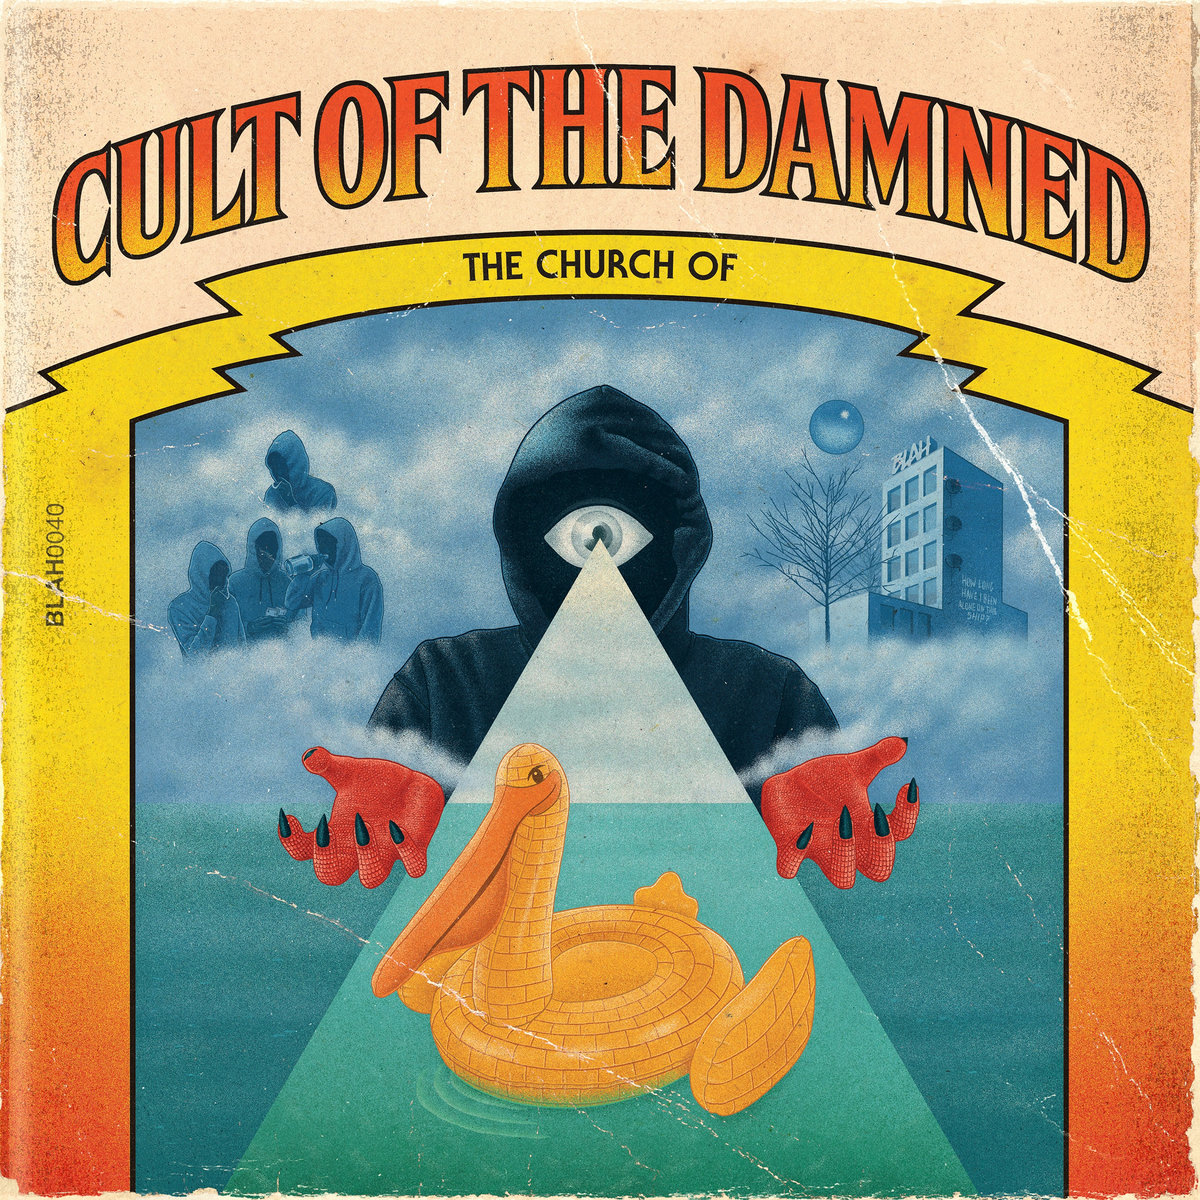 The_church_of_cult_of_the_damned